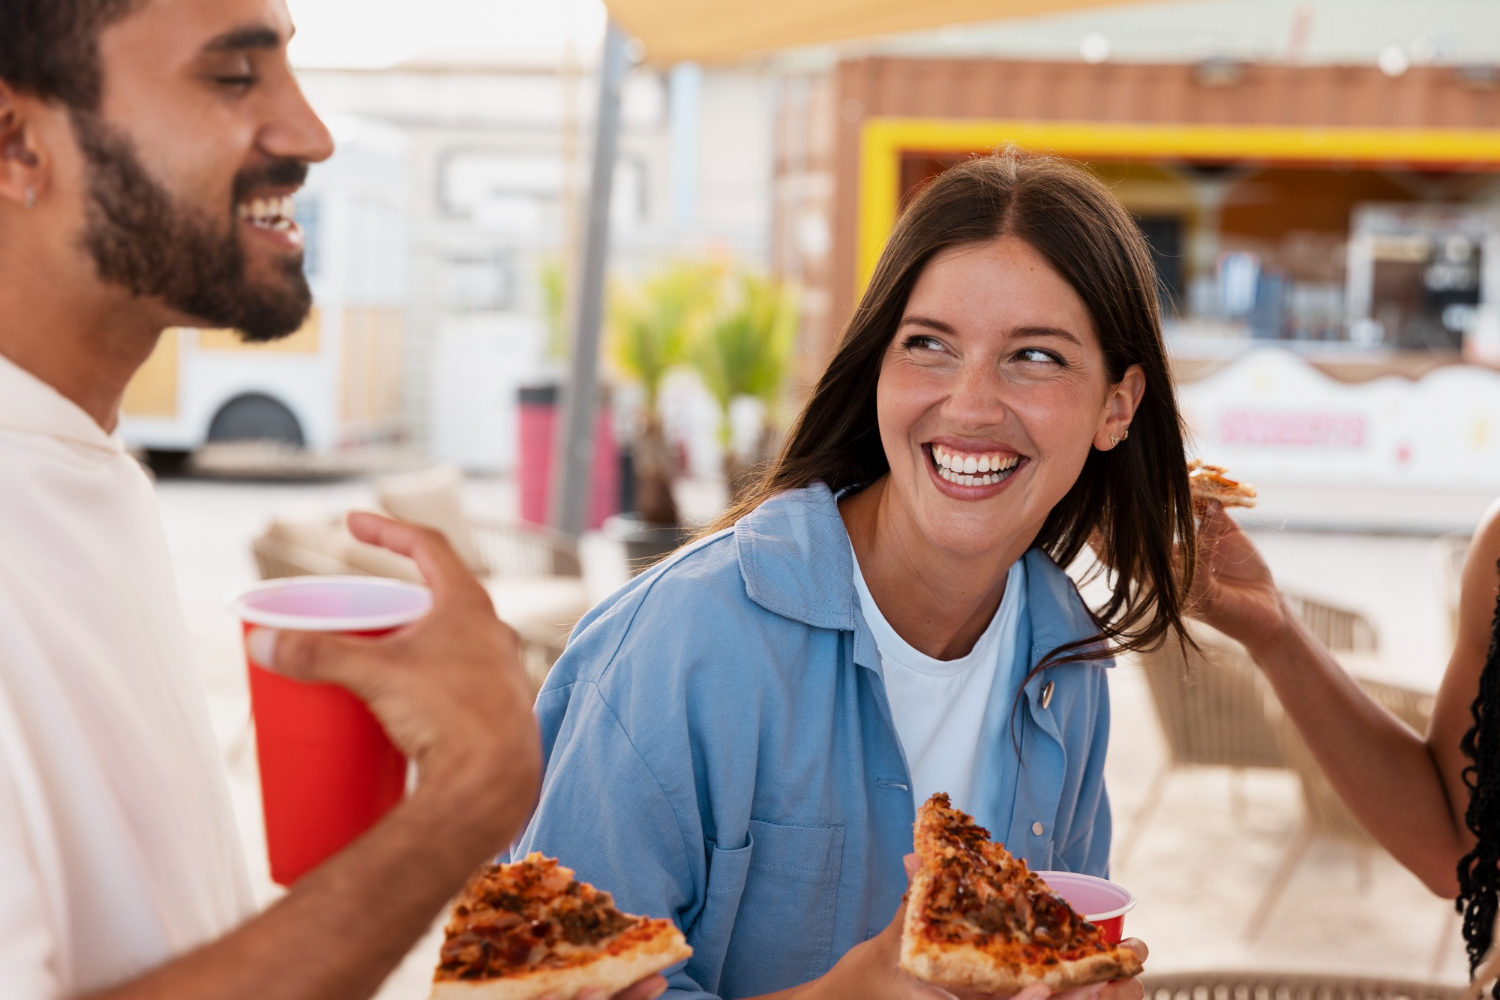 Smiley couple eating fast food